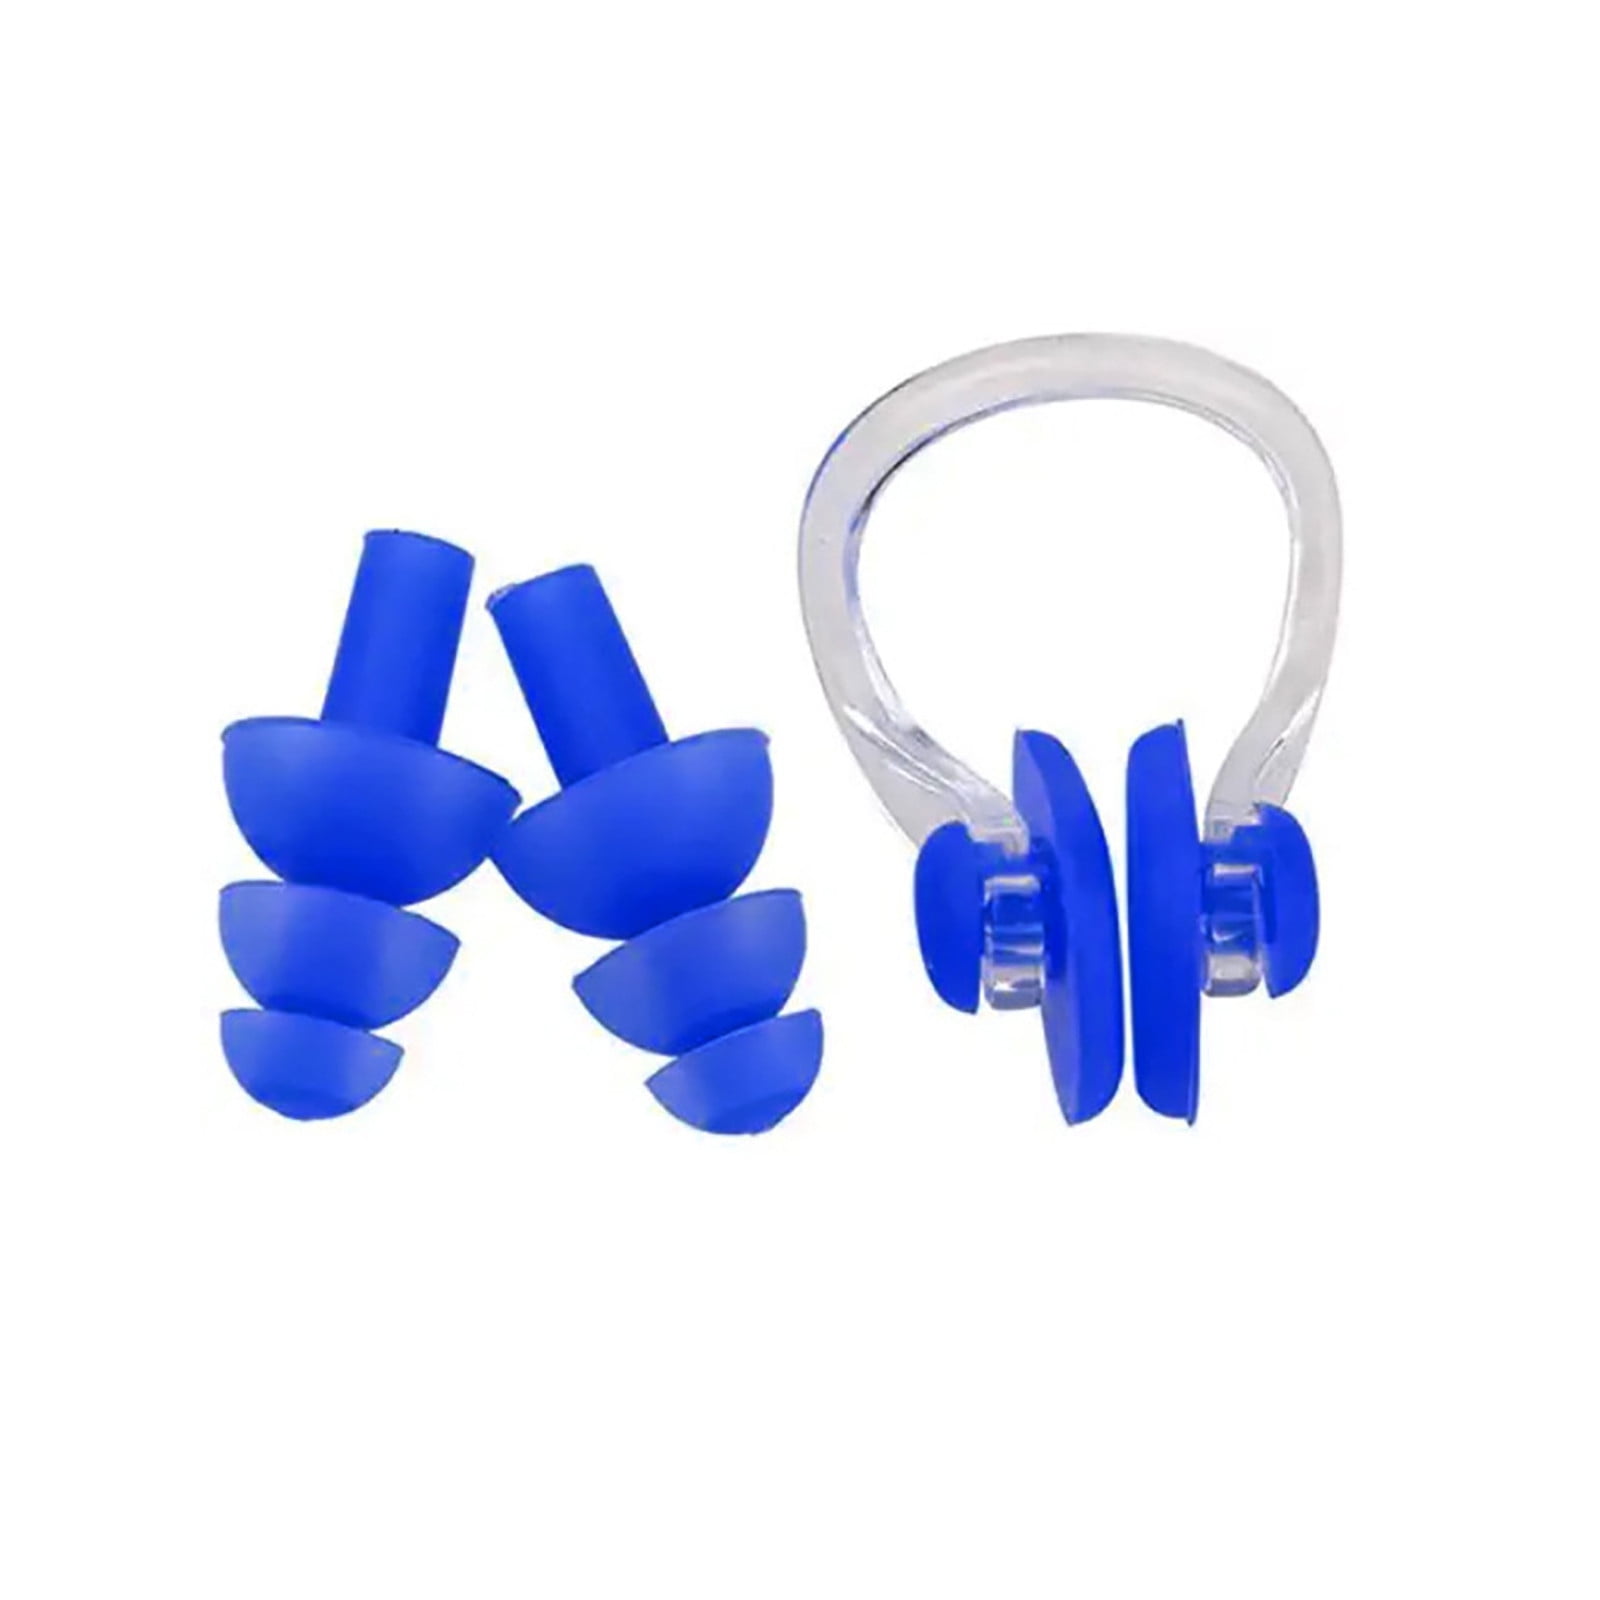 Blue Nutravicity Silicone Swimming Ear Plugs and Nose Clip Set for Water Sports 